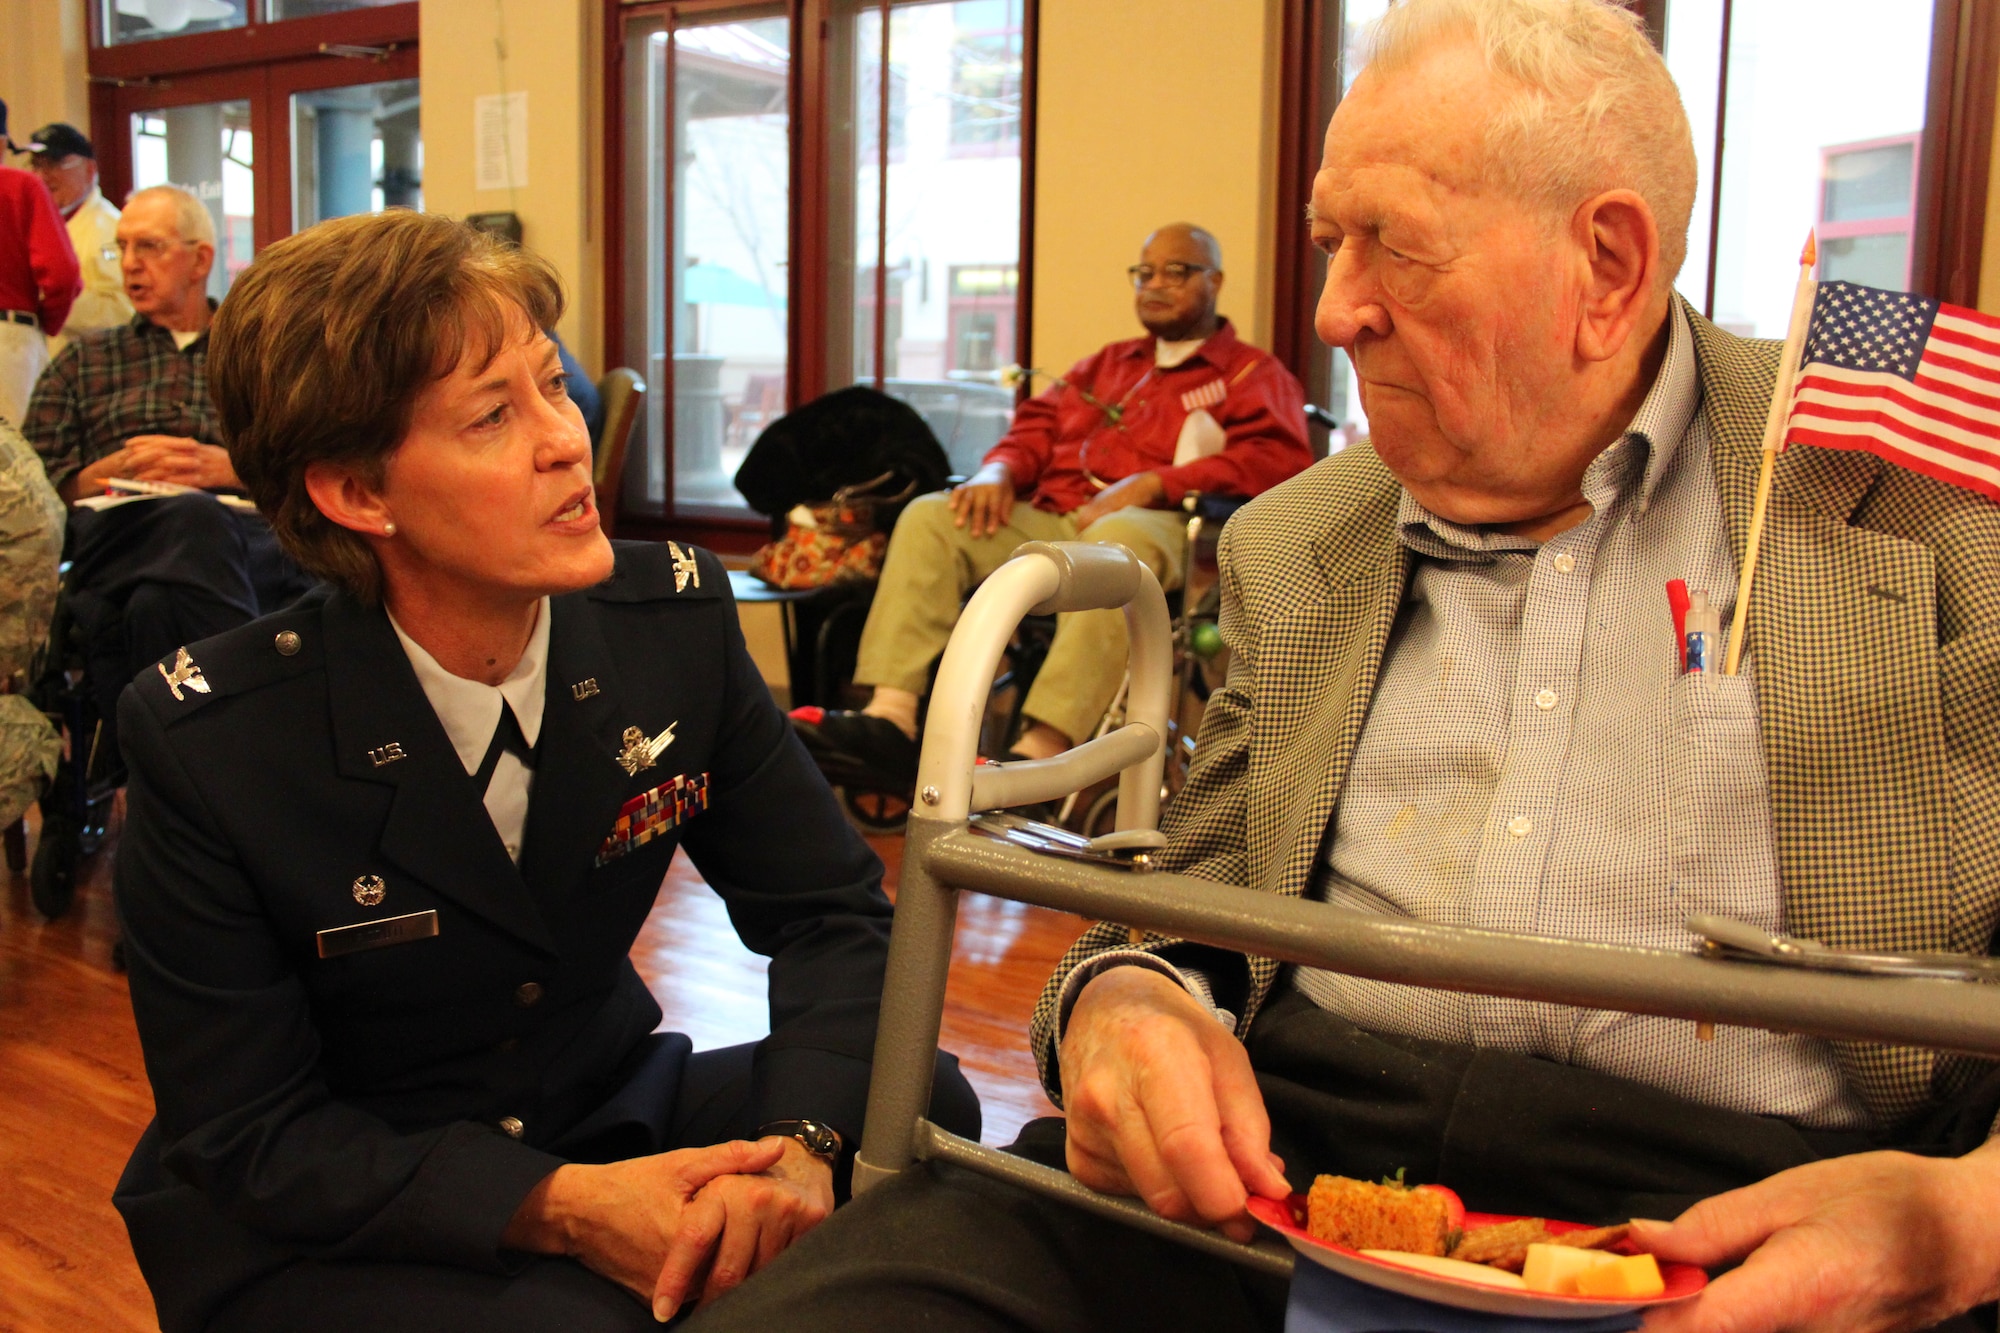 310th Wing Commander Col. Karen Rizzuti speaks with ex-POW Ned Nichols following a Veterans Day ceremony at the veteran's nursing home in Aurora, Colo.The 310th SW teamed up with the Denver Hospice to honor local veterans at the Veterans Nursing Home at Fitzsimons on Nov. 11. (U.S. Air Force photo/Tech. Sgt. Scott P. Farley)